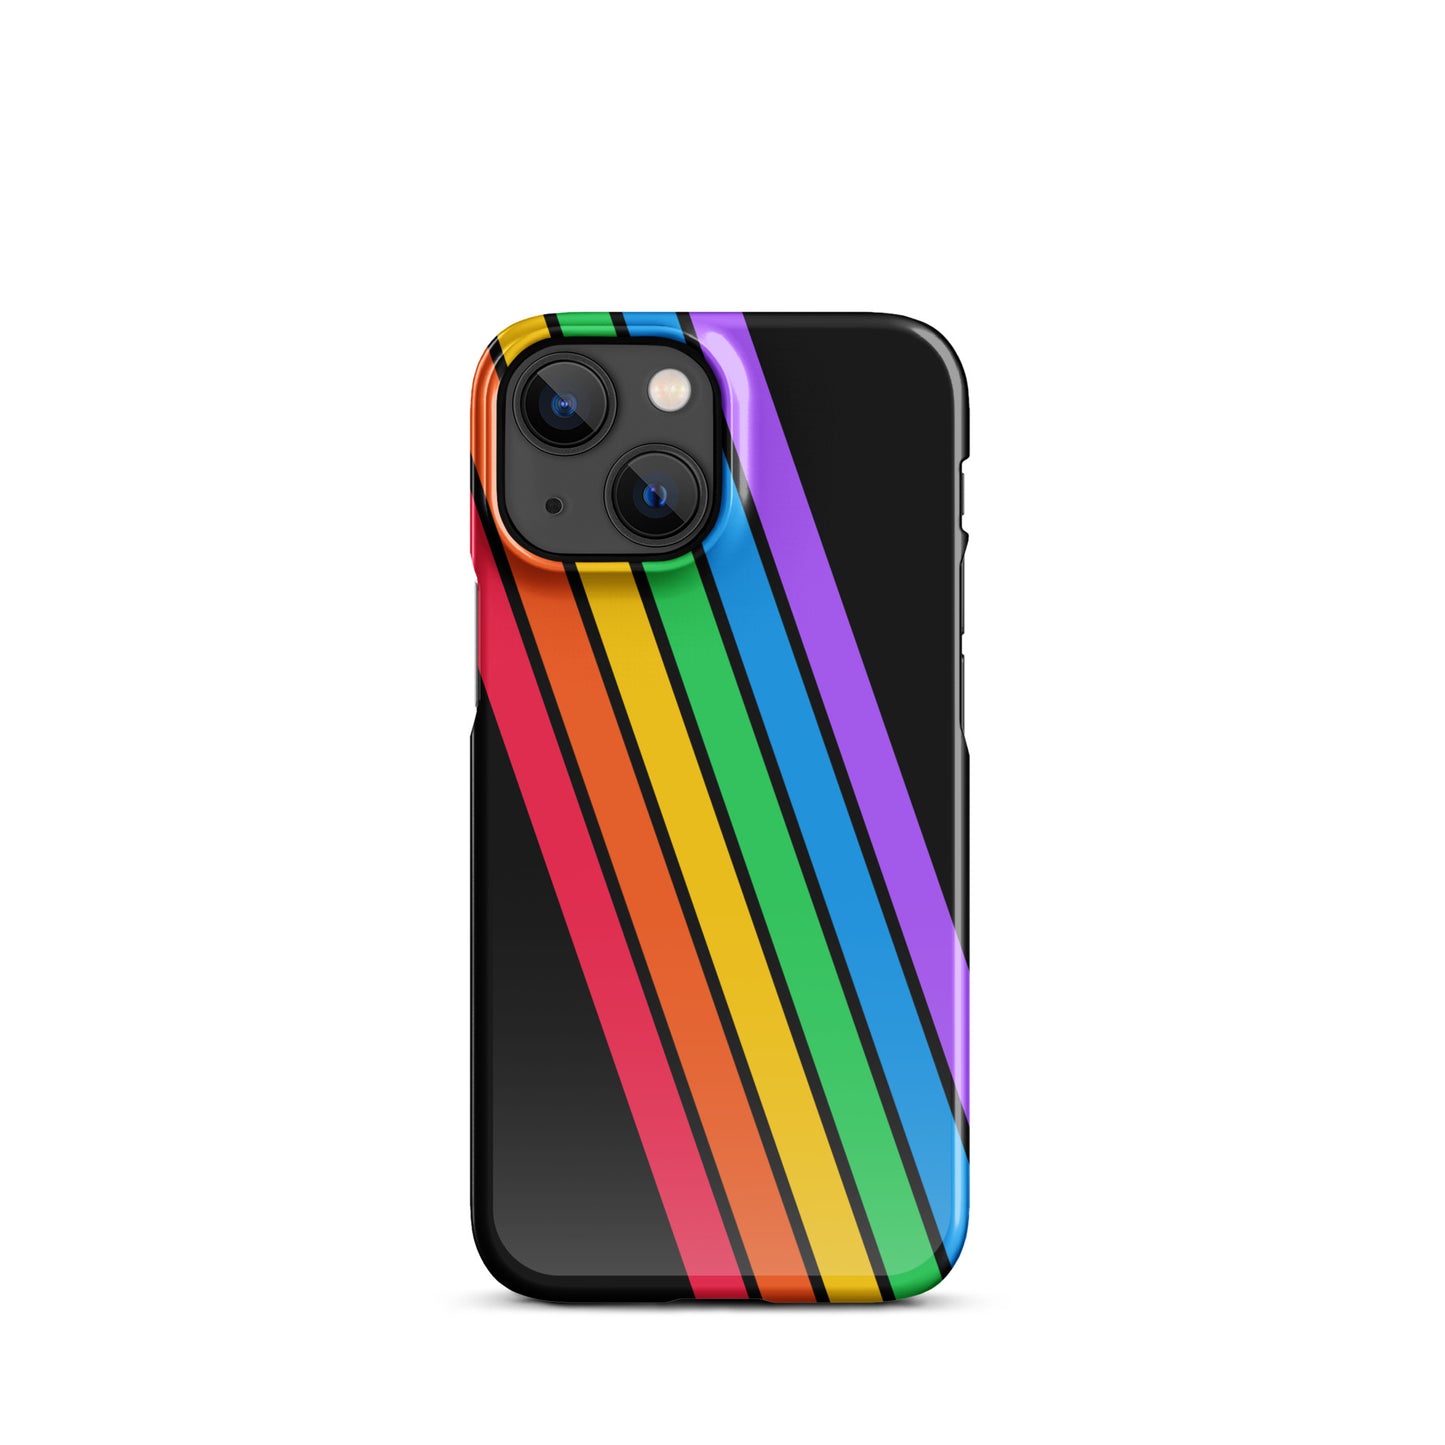 Snap case for iPhone: Tales of Colors